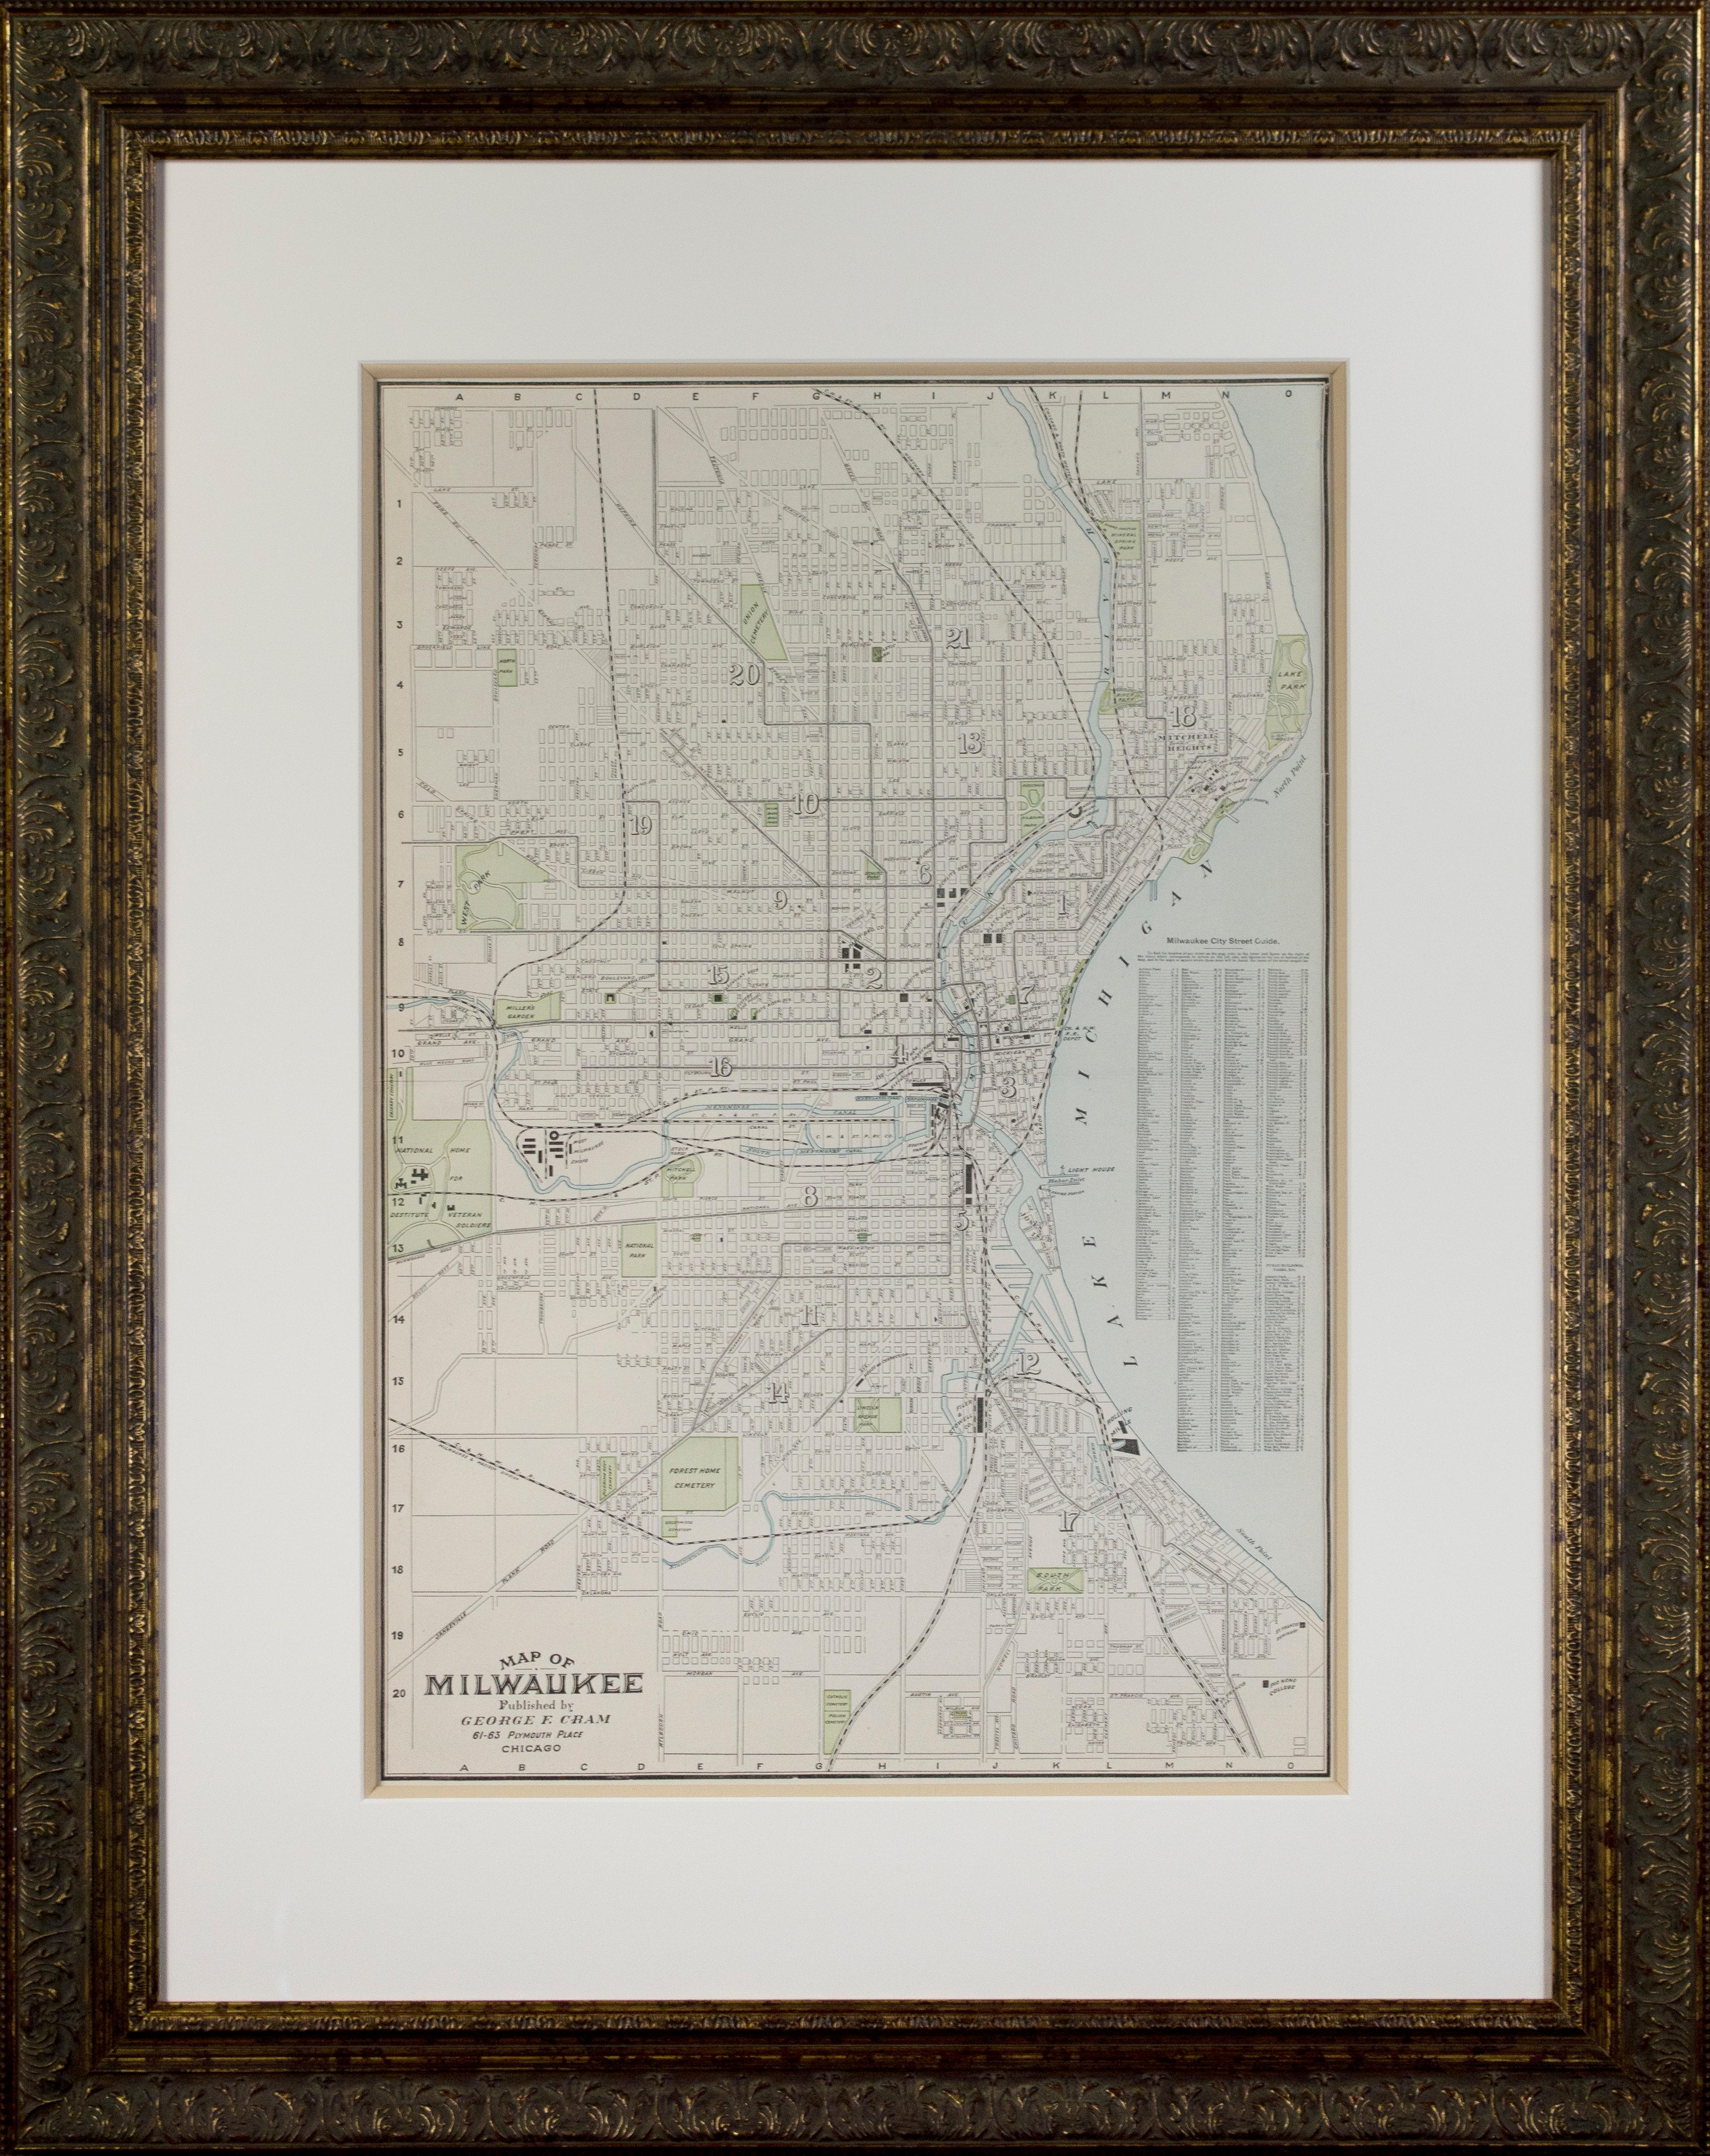 'Map of Milwaukee' color lithograph published by George F. Cram of Chicago